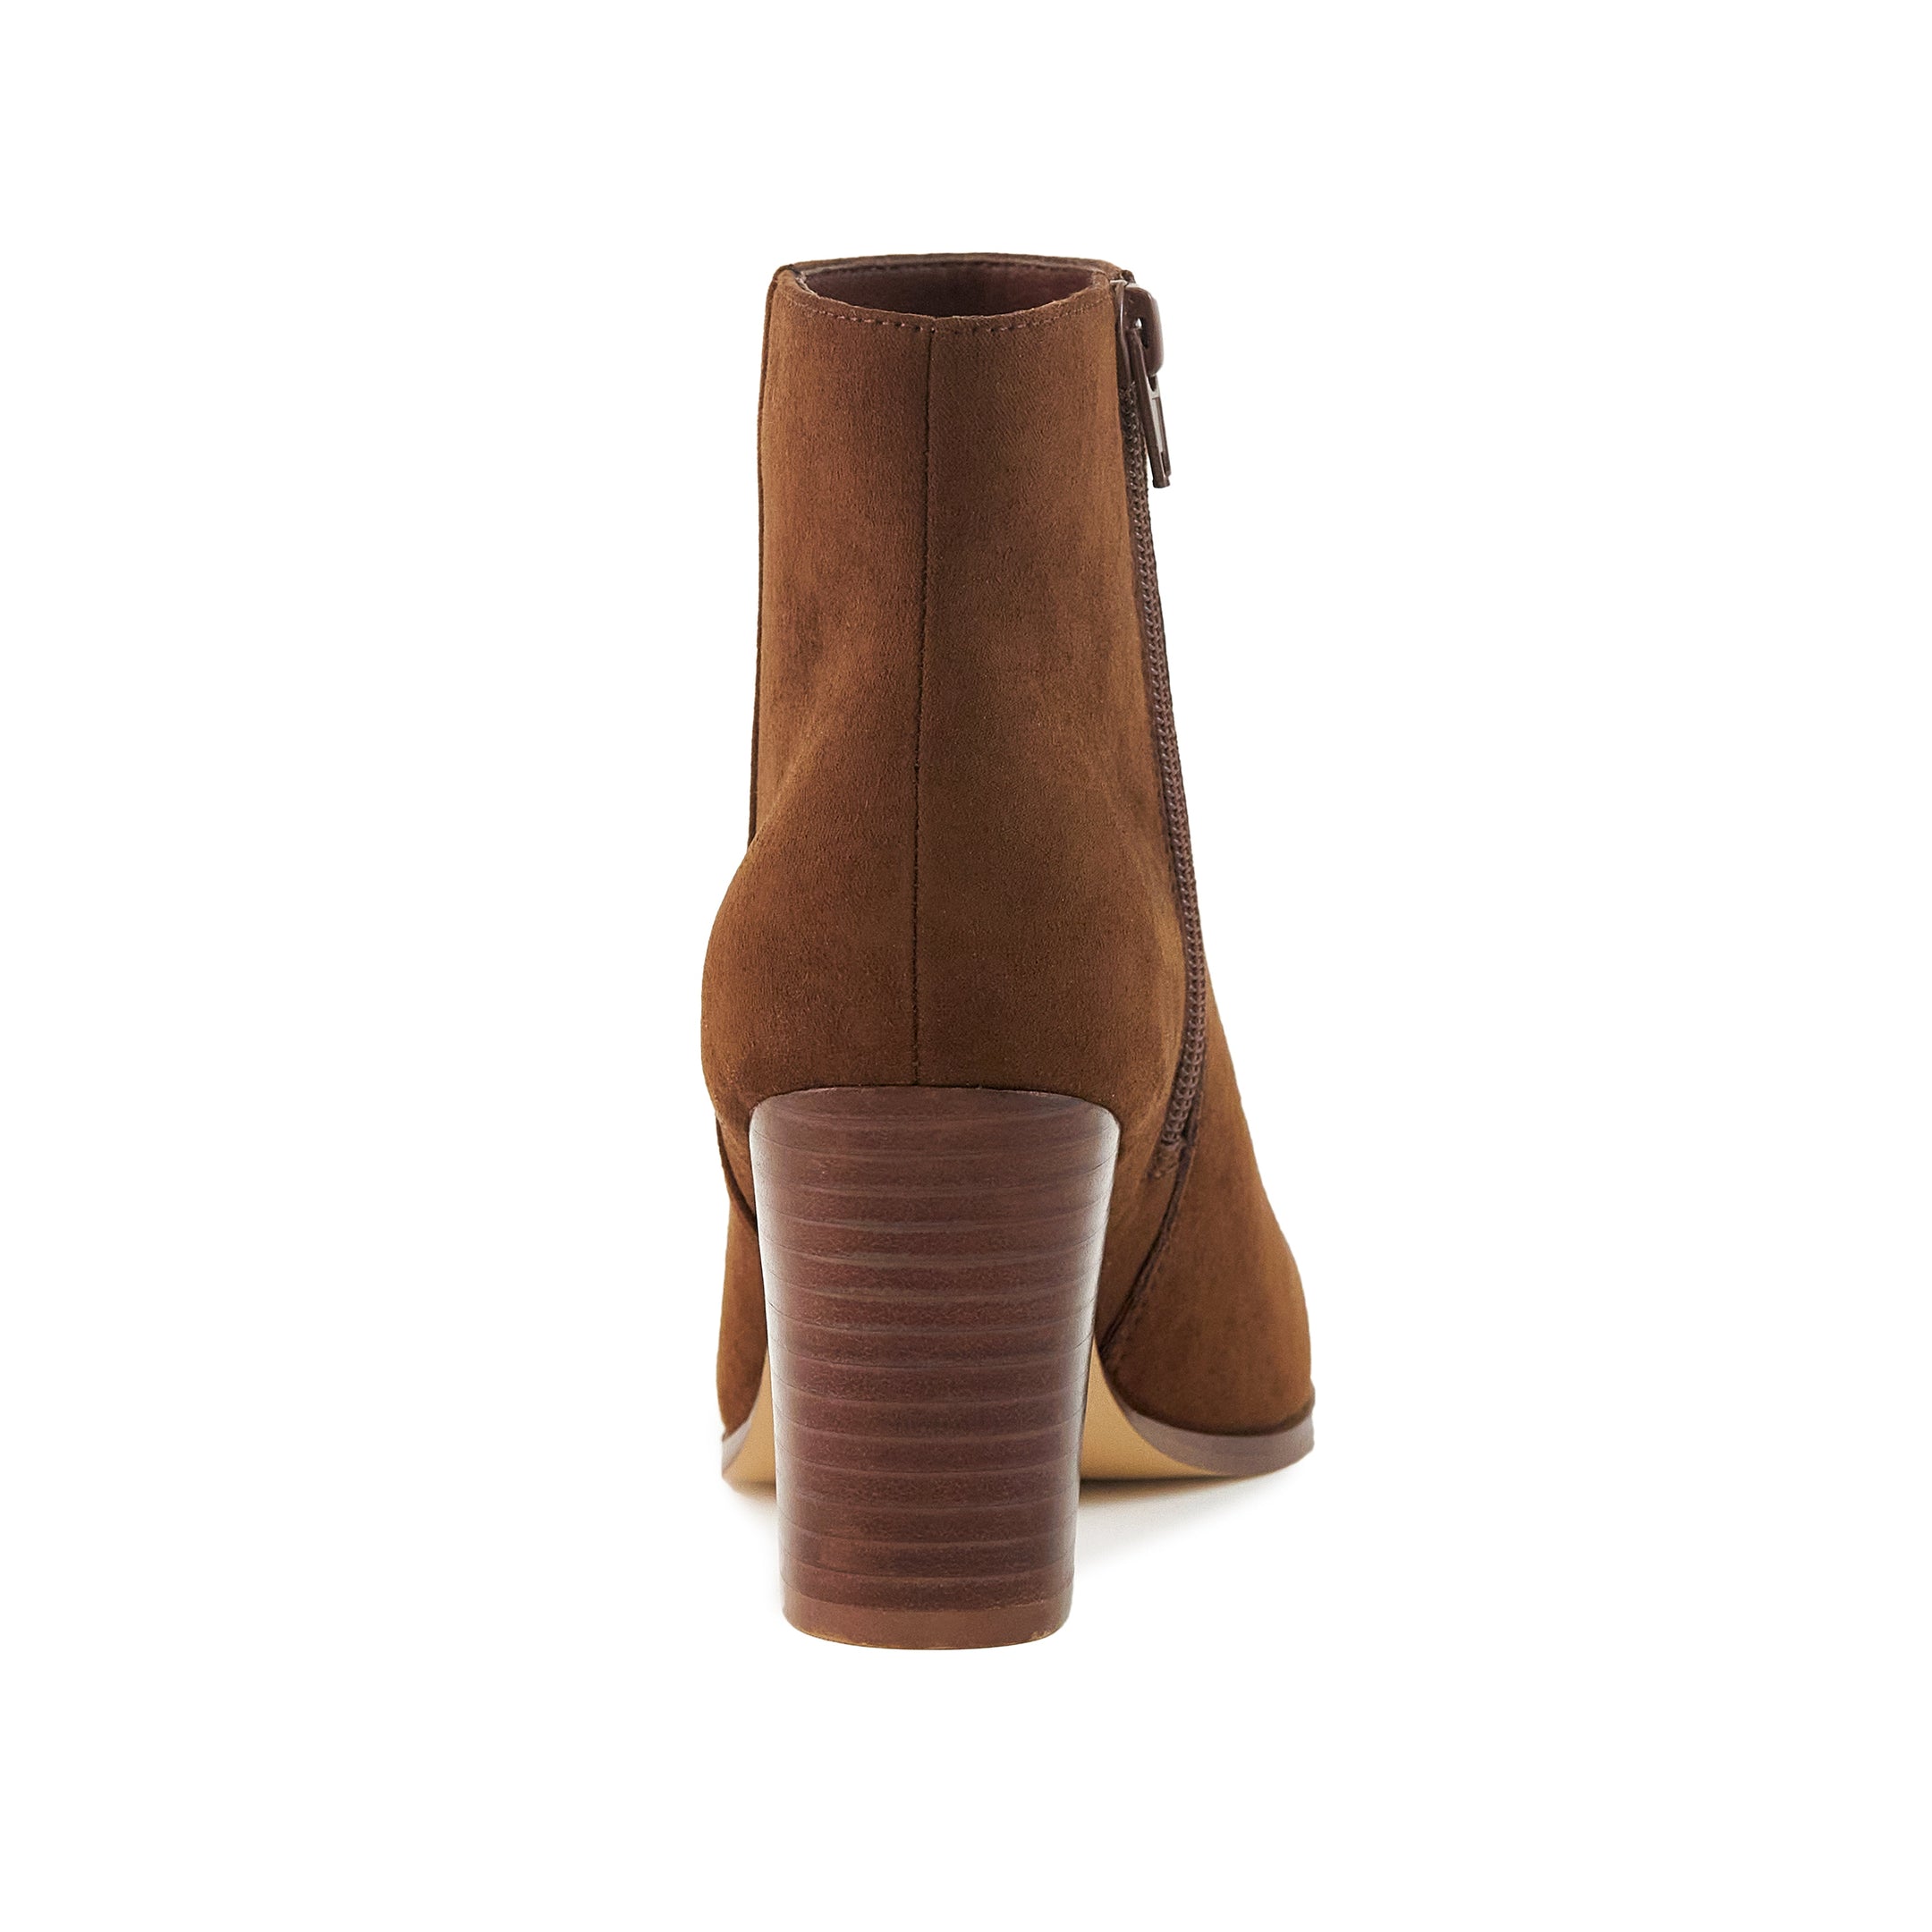 Buy Women's Malibu Boots Brown by Nest Shoes